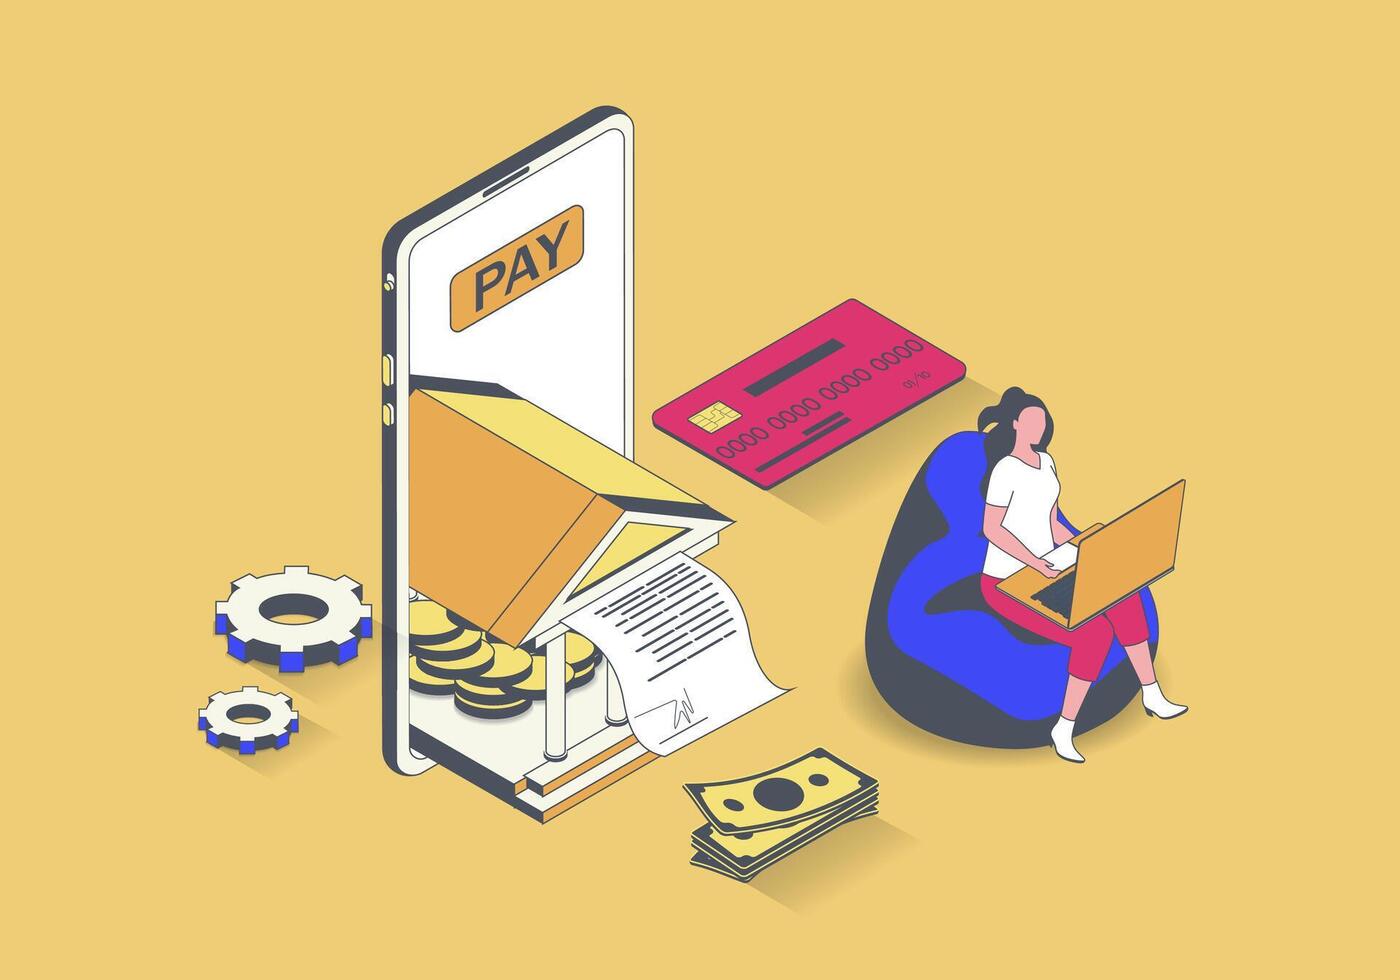 Online banking concept in 3d isometric design. Woman paying digital invoice, makes financial transactions and manages finances in app. Vector illustration with isometry people scene for web graphic